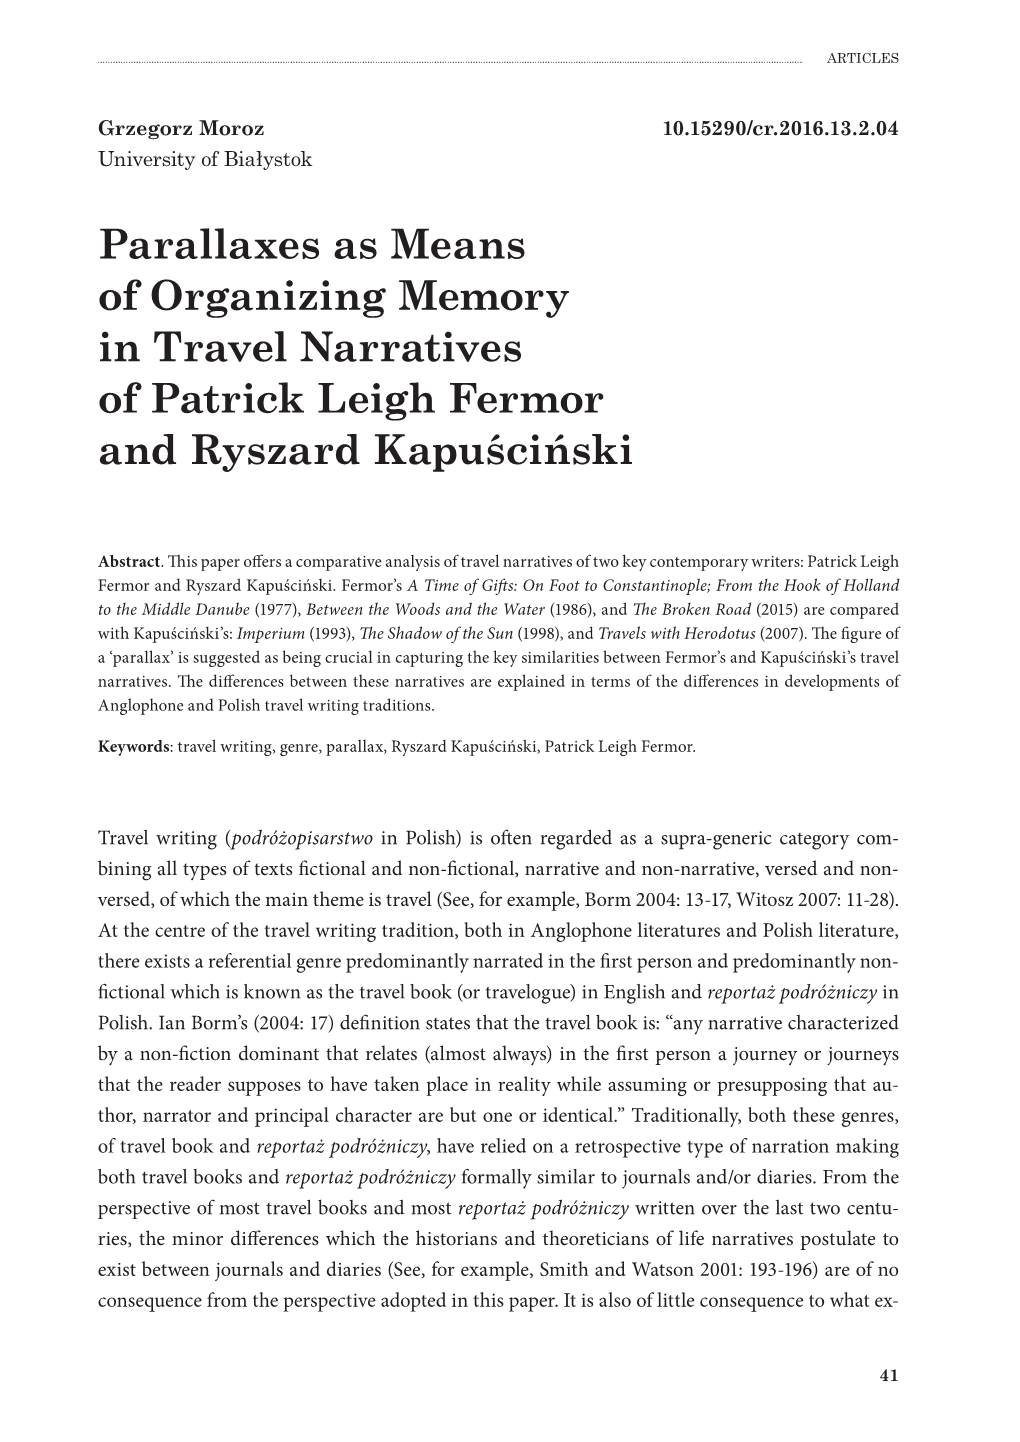 Parallaxes As Means of Organizing Memory in Travel Narratives of Patrick Leigh Fermor and Ryszard Kapuściński